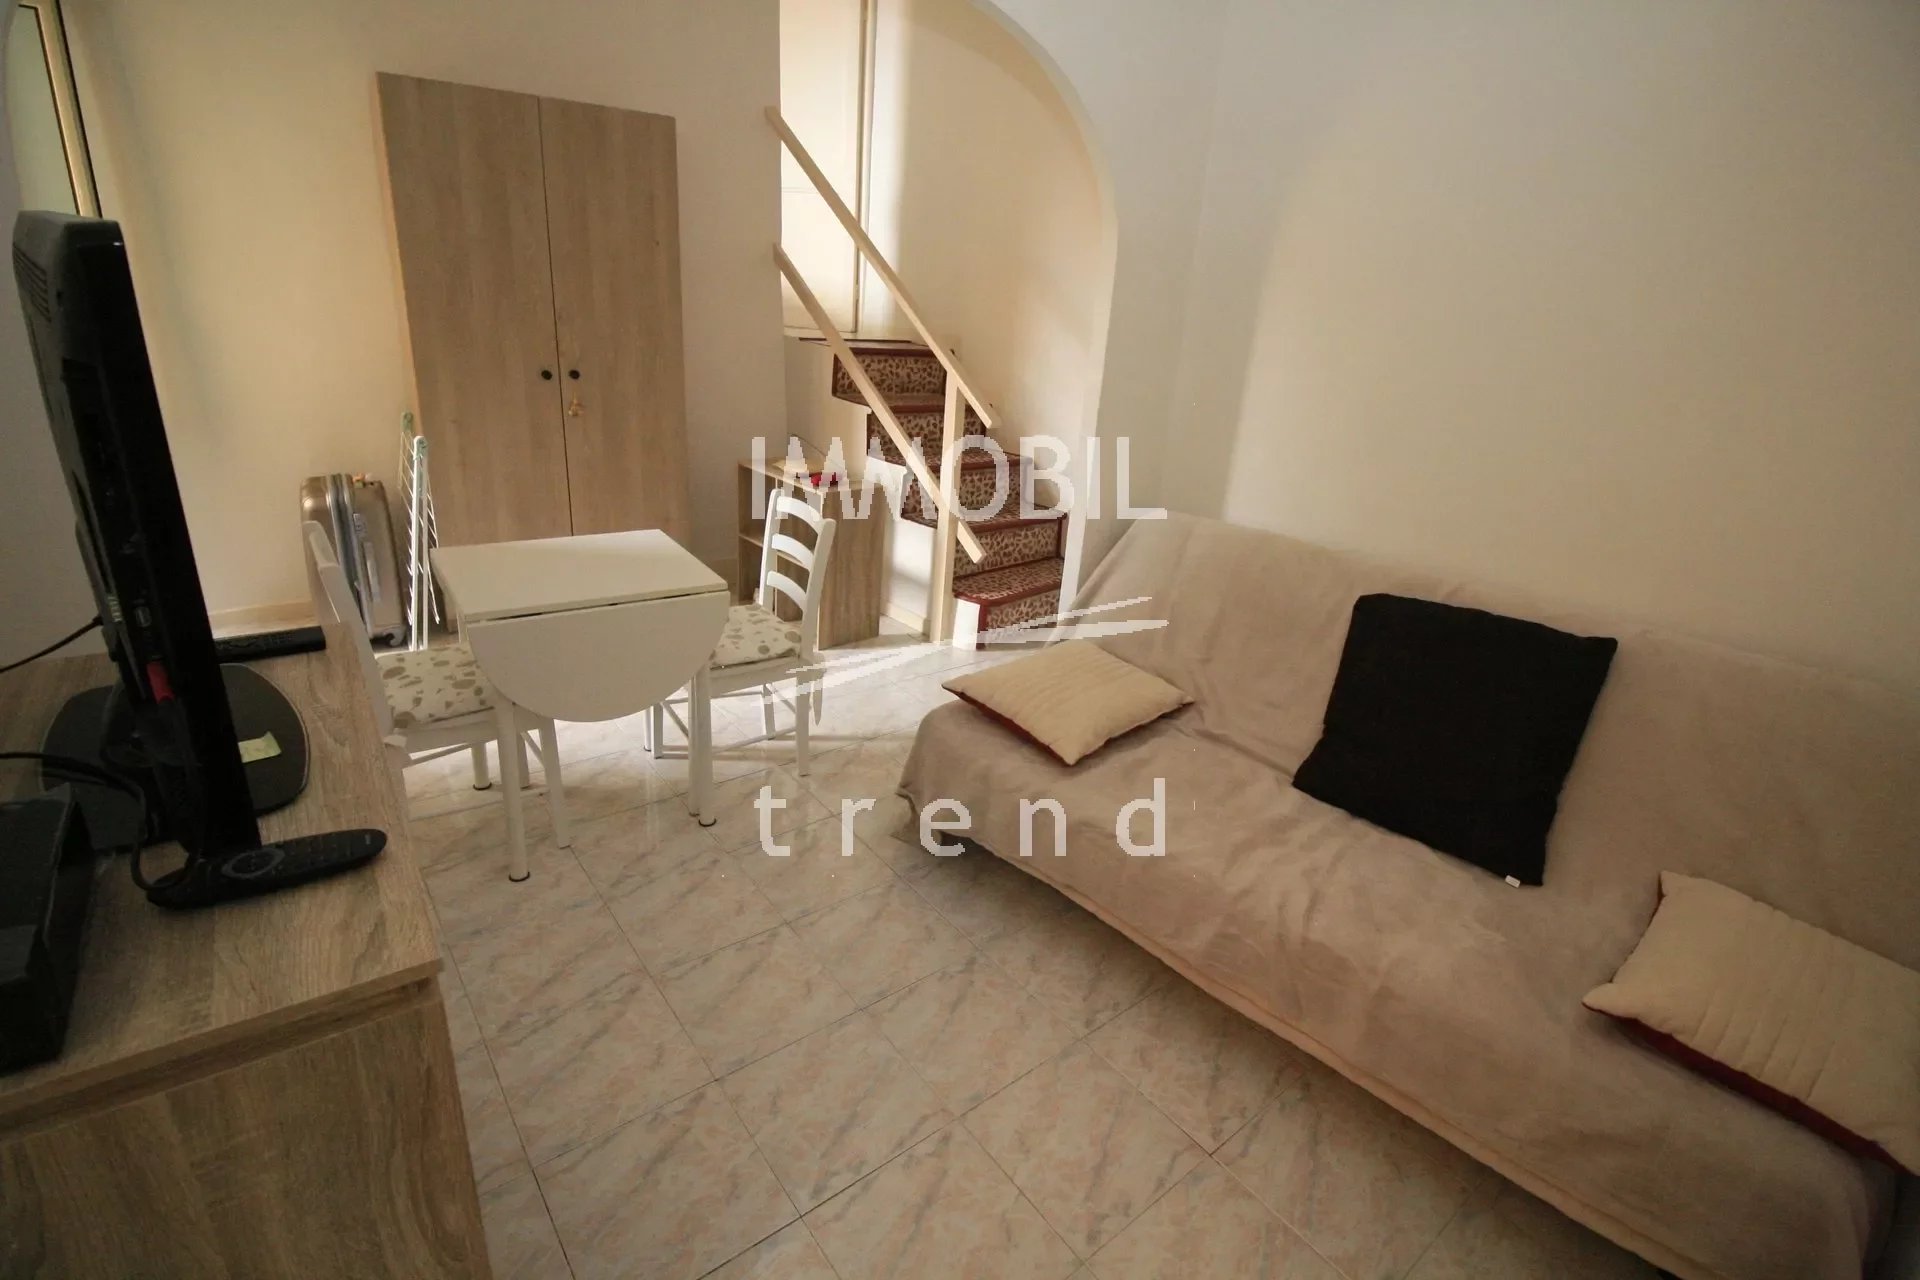 SOLE AGENT - MENTON VIEILLE VILLE - apartment in perfect conditions for sale